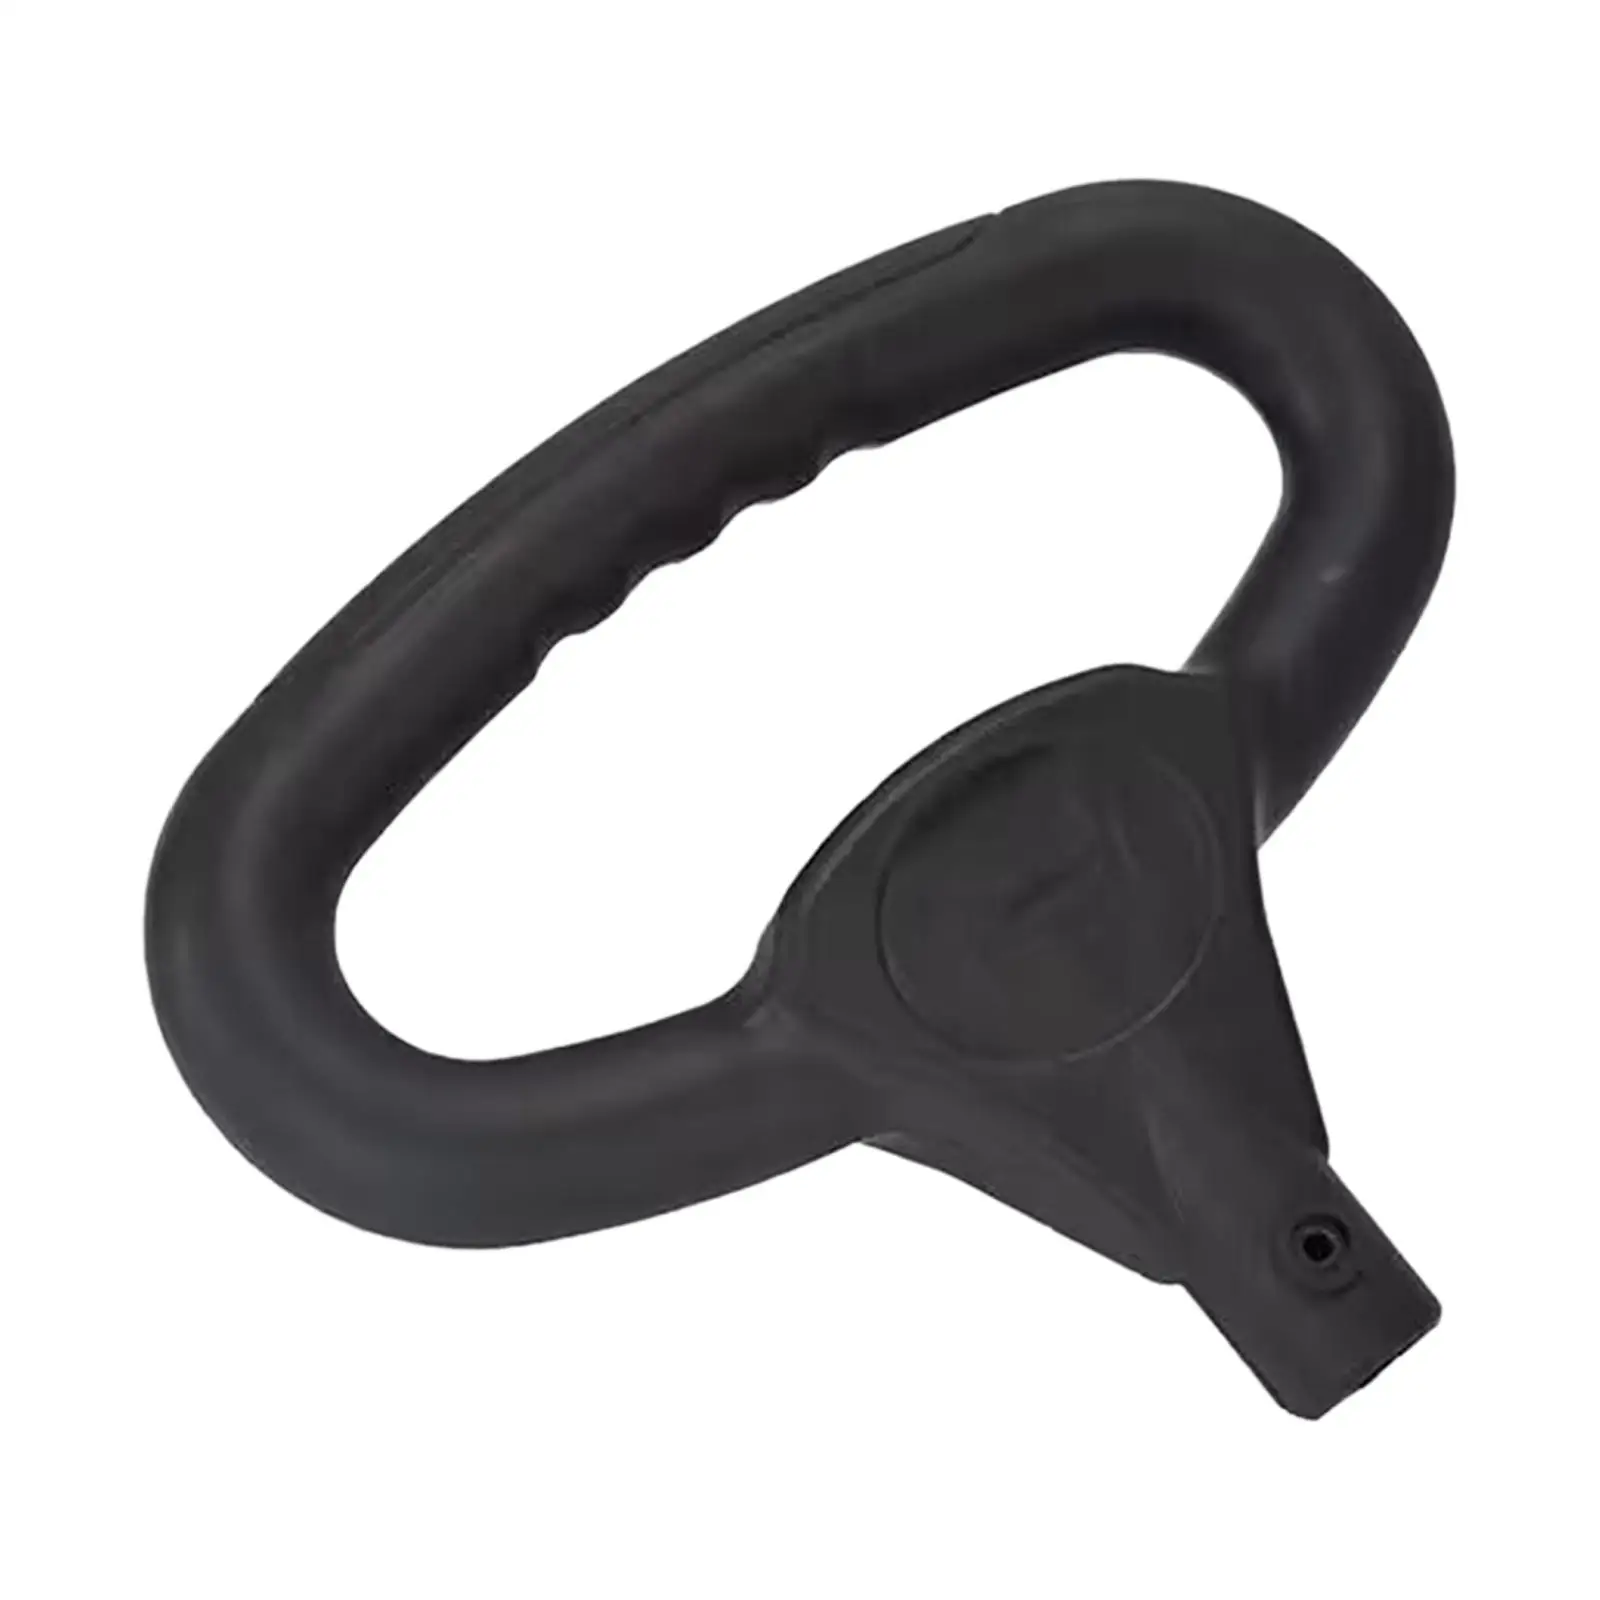 Wagon Cart Push Handle, Trolley Handle, Portable Black Spare Part, Replacement